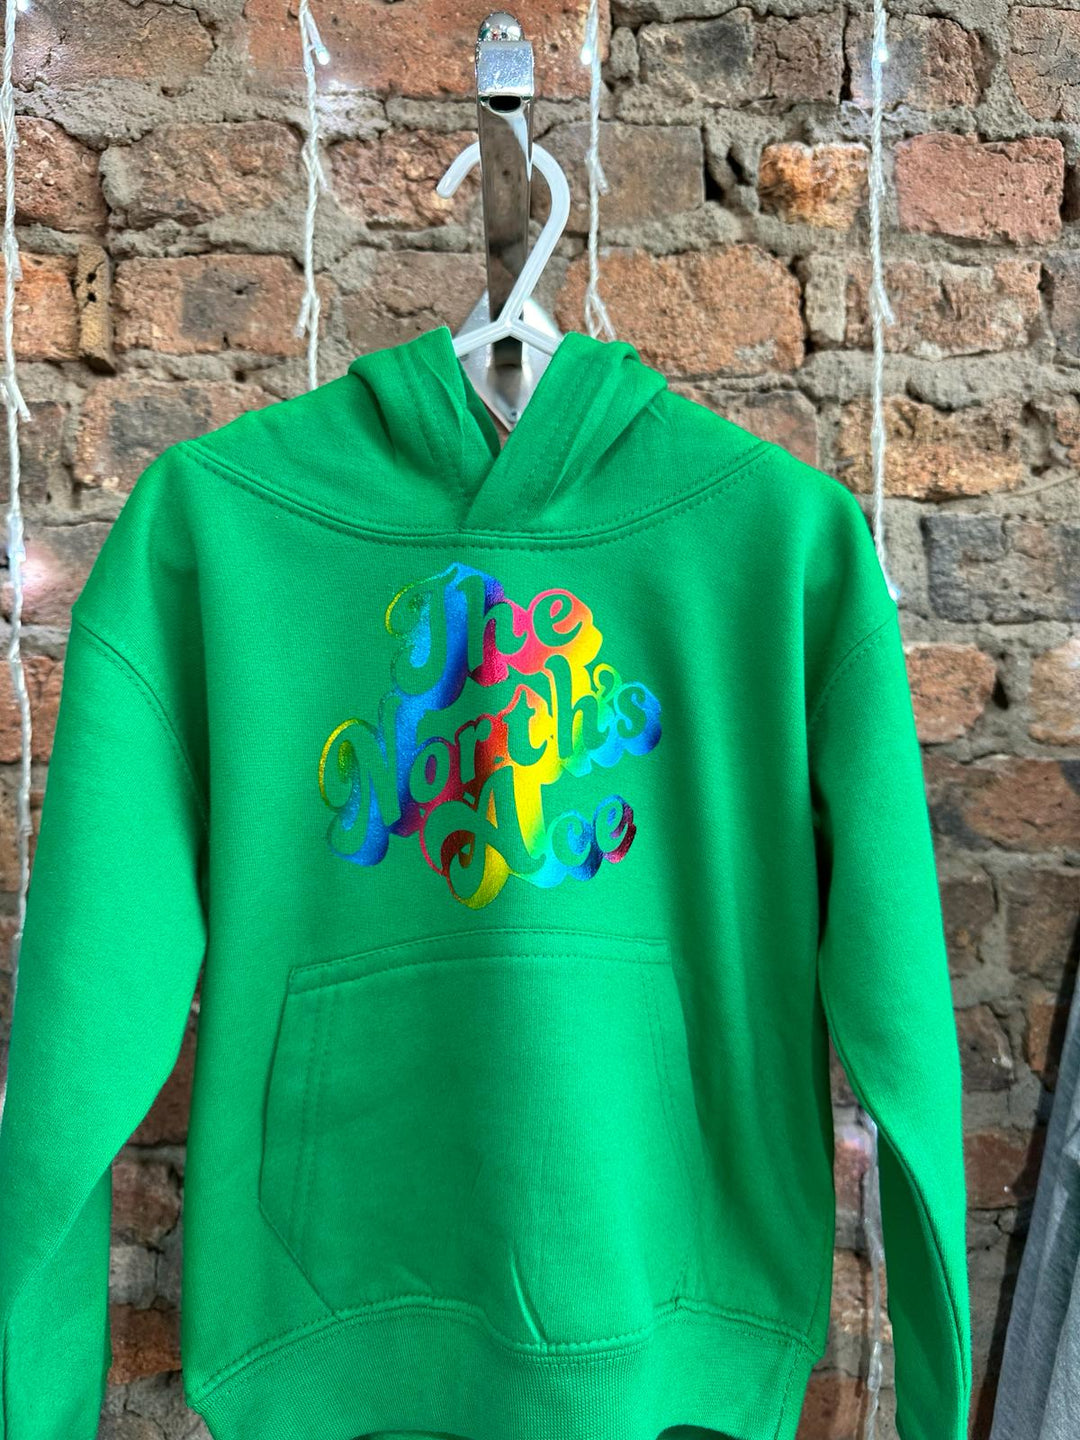 *KIDS The North's Ace Green Hoodie - Age 3-4